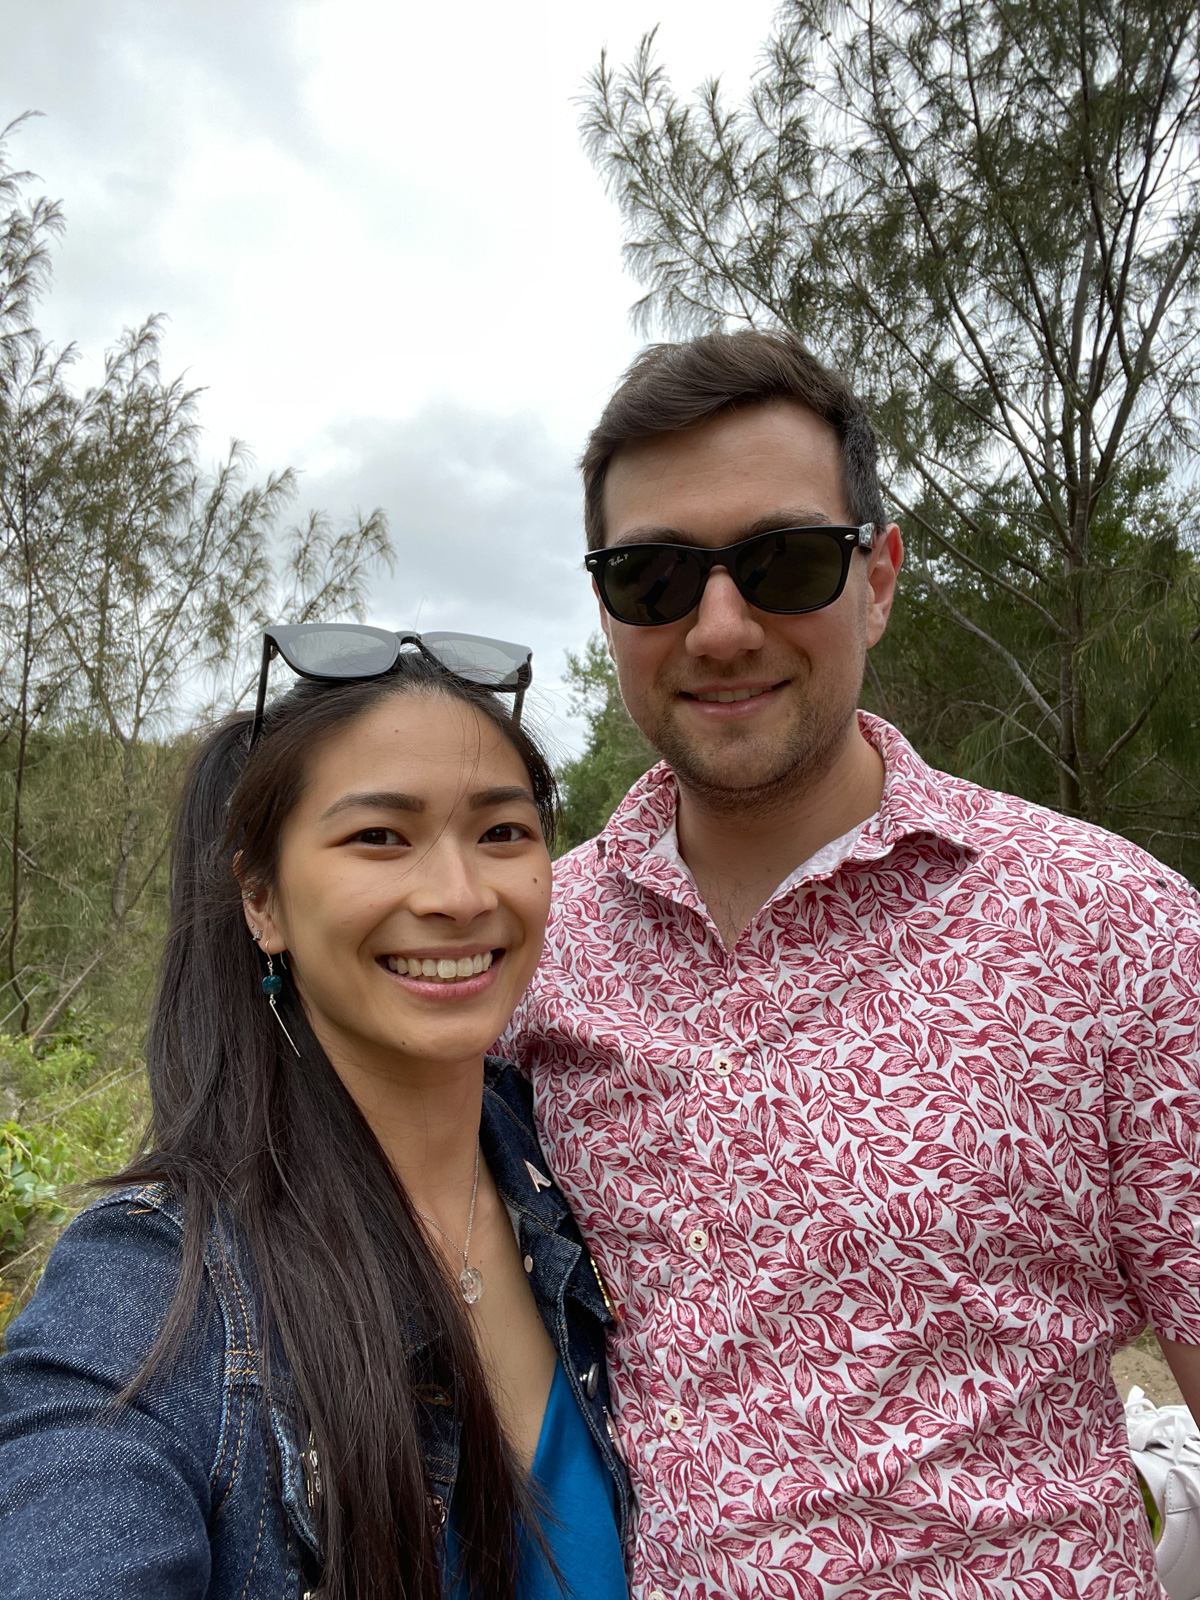 A selfie of a man and woman. The man is wearing a shirt with a red leaf pattern and the woman is wearing a blue top with a dark denim jacket. The man has dark sunglasses on and the woman has sunglasses on top of her head